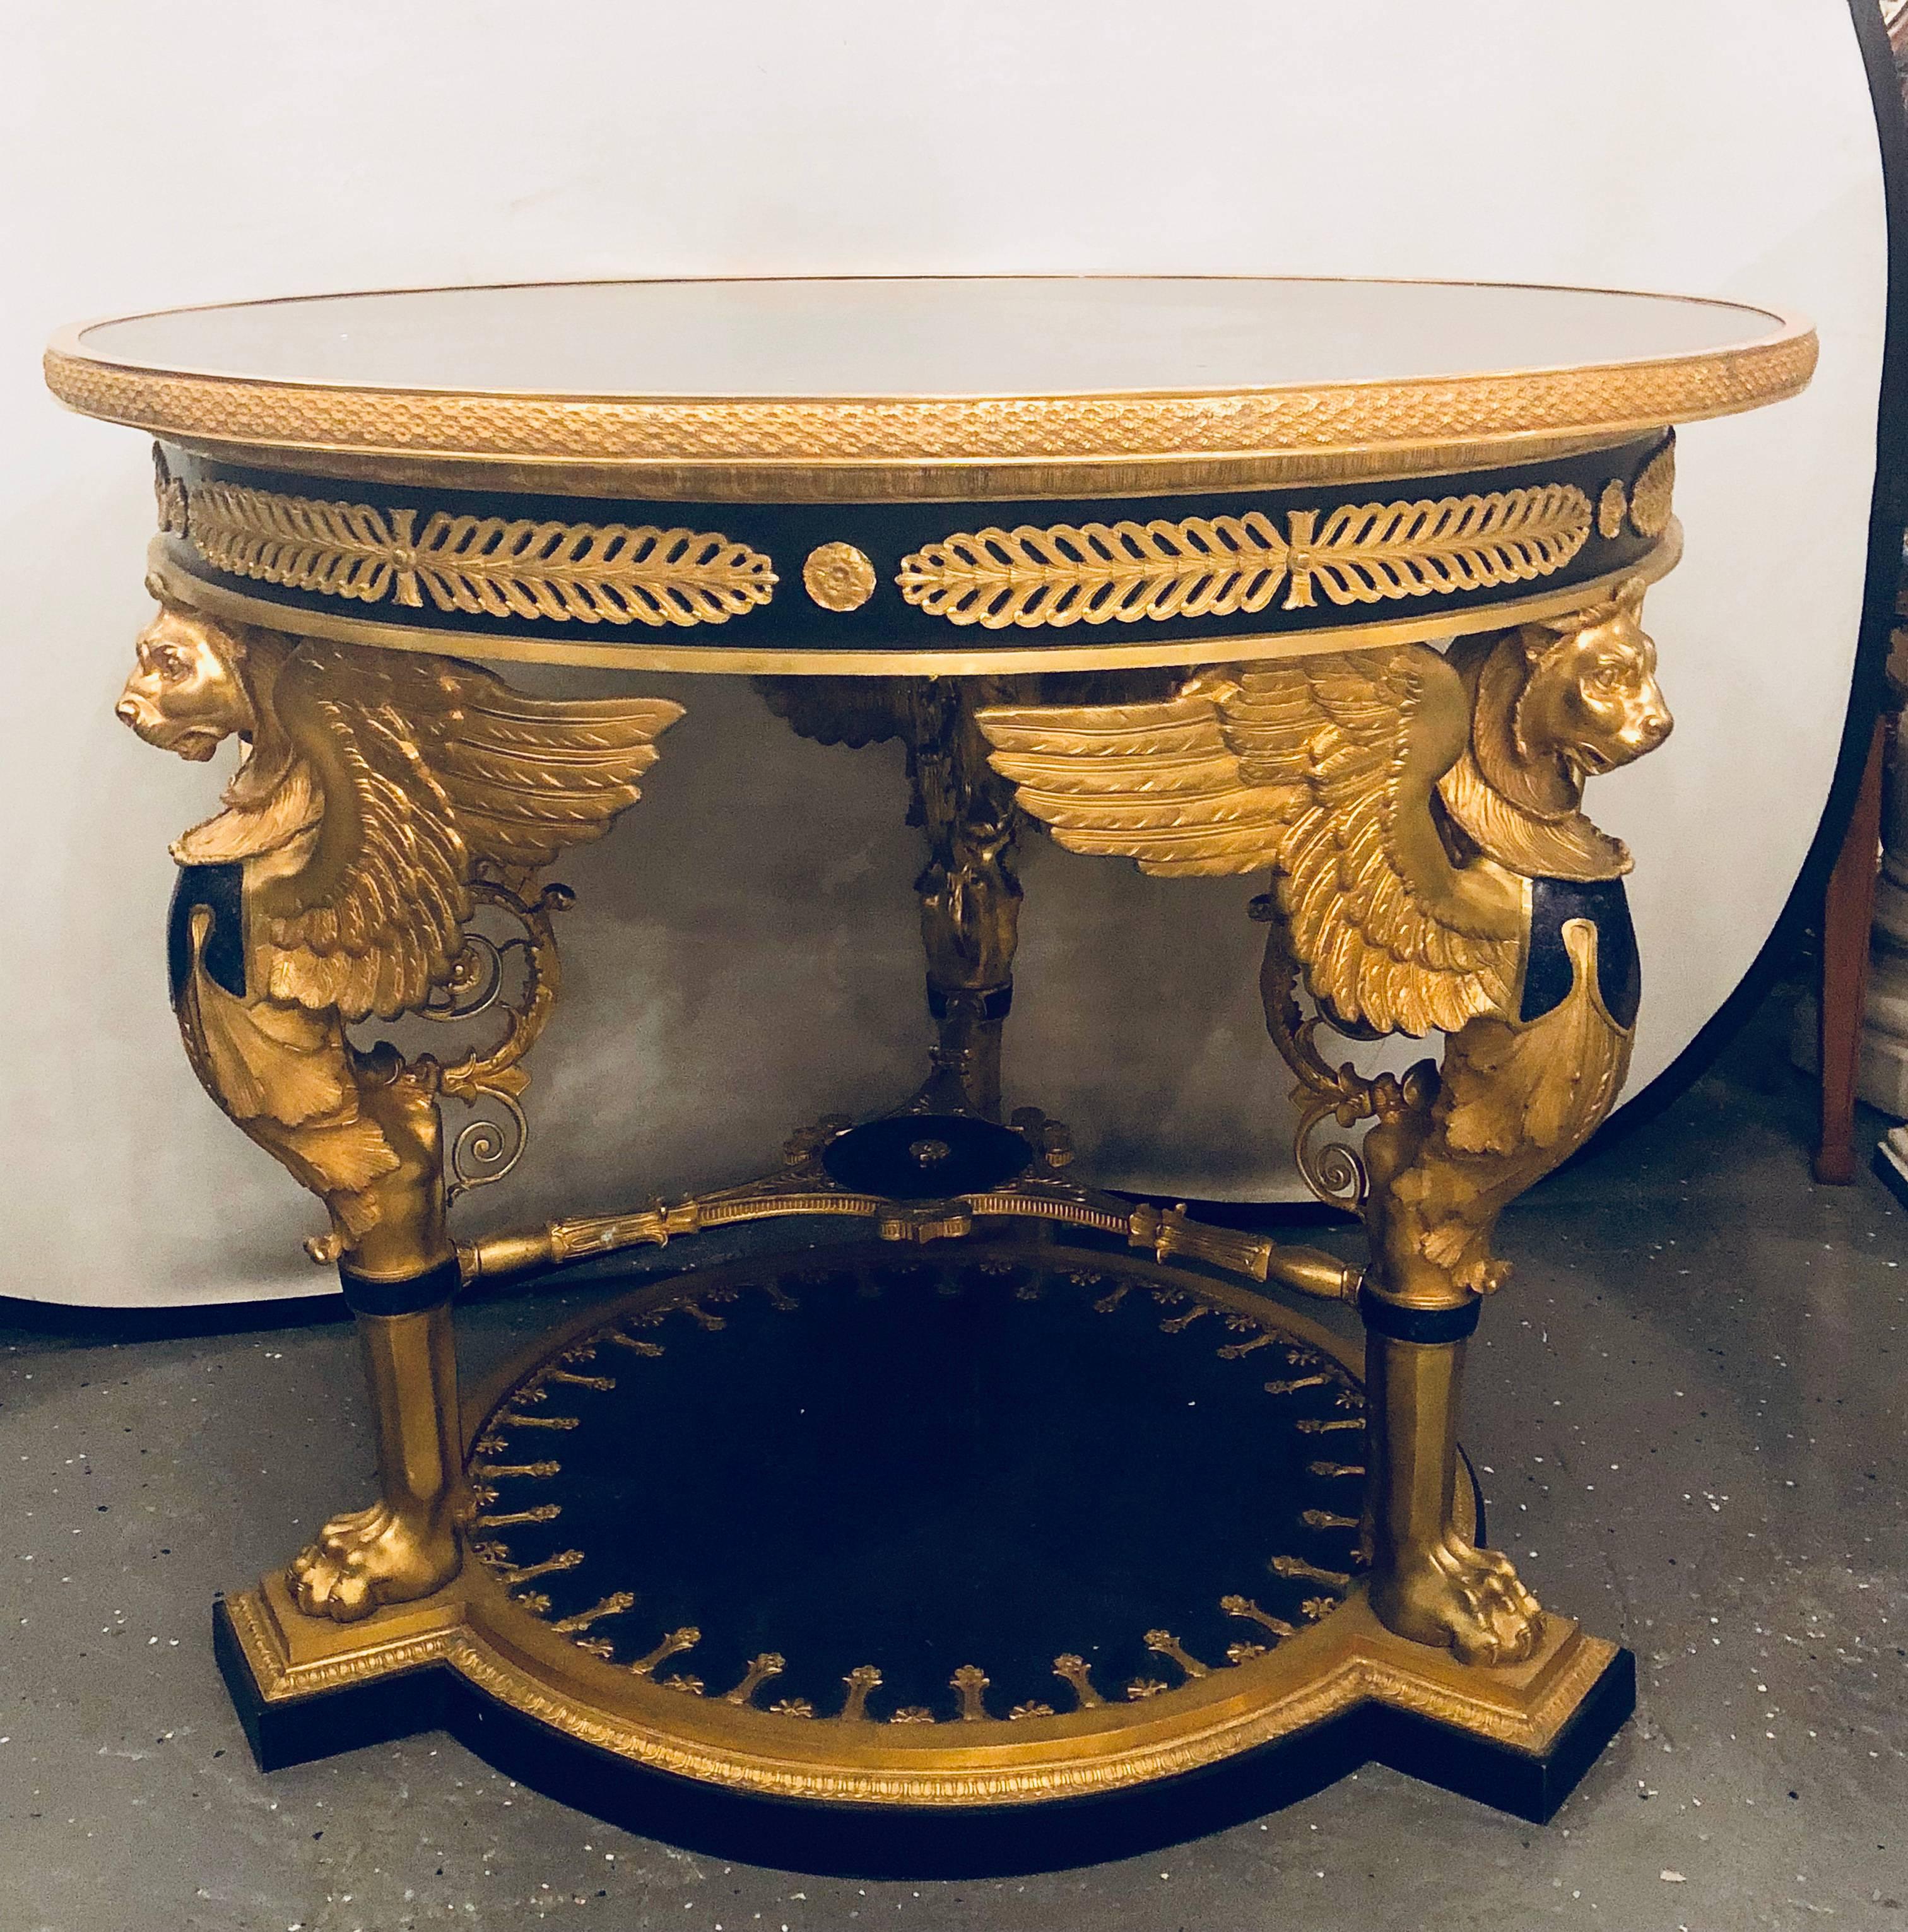 A large Empire style gilt and patinated Bronze and Lapis Lazuli centre table. Most likely Italian in very fine bronze chiselled detail. The full bodied gilt bronze and Lapis Lazuli winged lions supporting an exceptional tabletop. This fine piece is